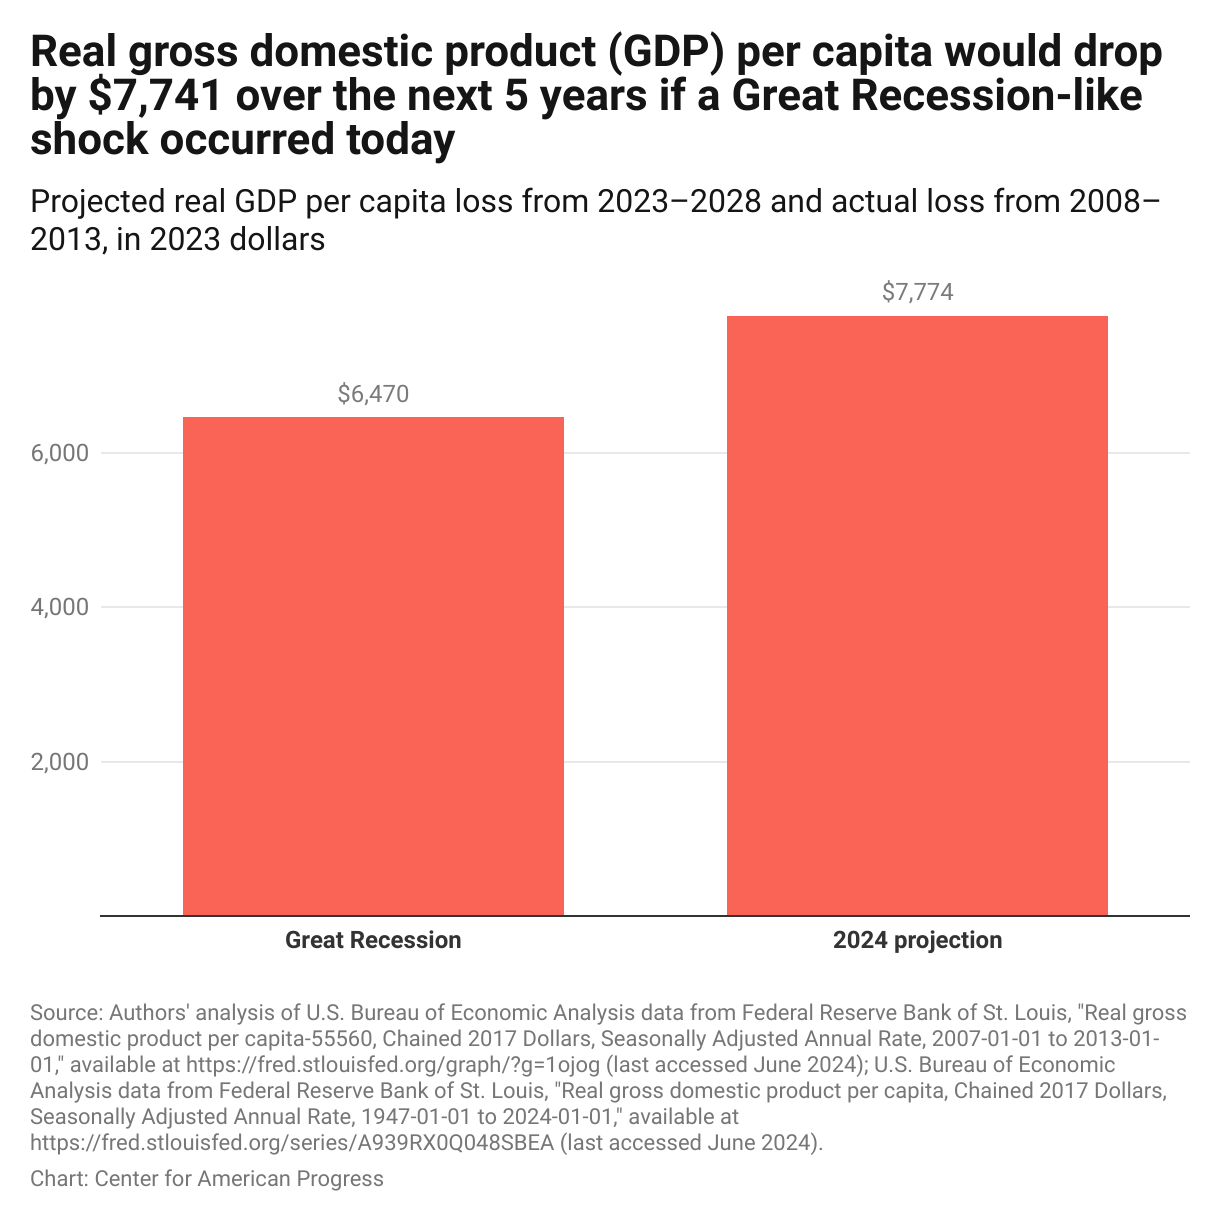 Bar graph showing that during the Great Recession, real GDP per capita fell by 9.5 percent, or a loss of $6,443 in 2023 dollars, when compared with 2007, and the same percentage decline in April 2024 would lead to a projected per capita loss of $7,741 in 2023 dollars over the next five years.